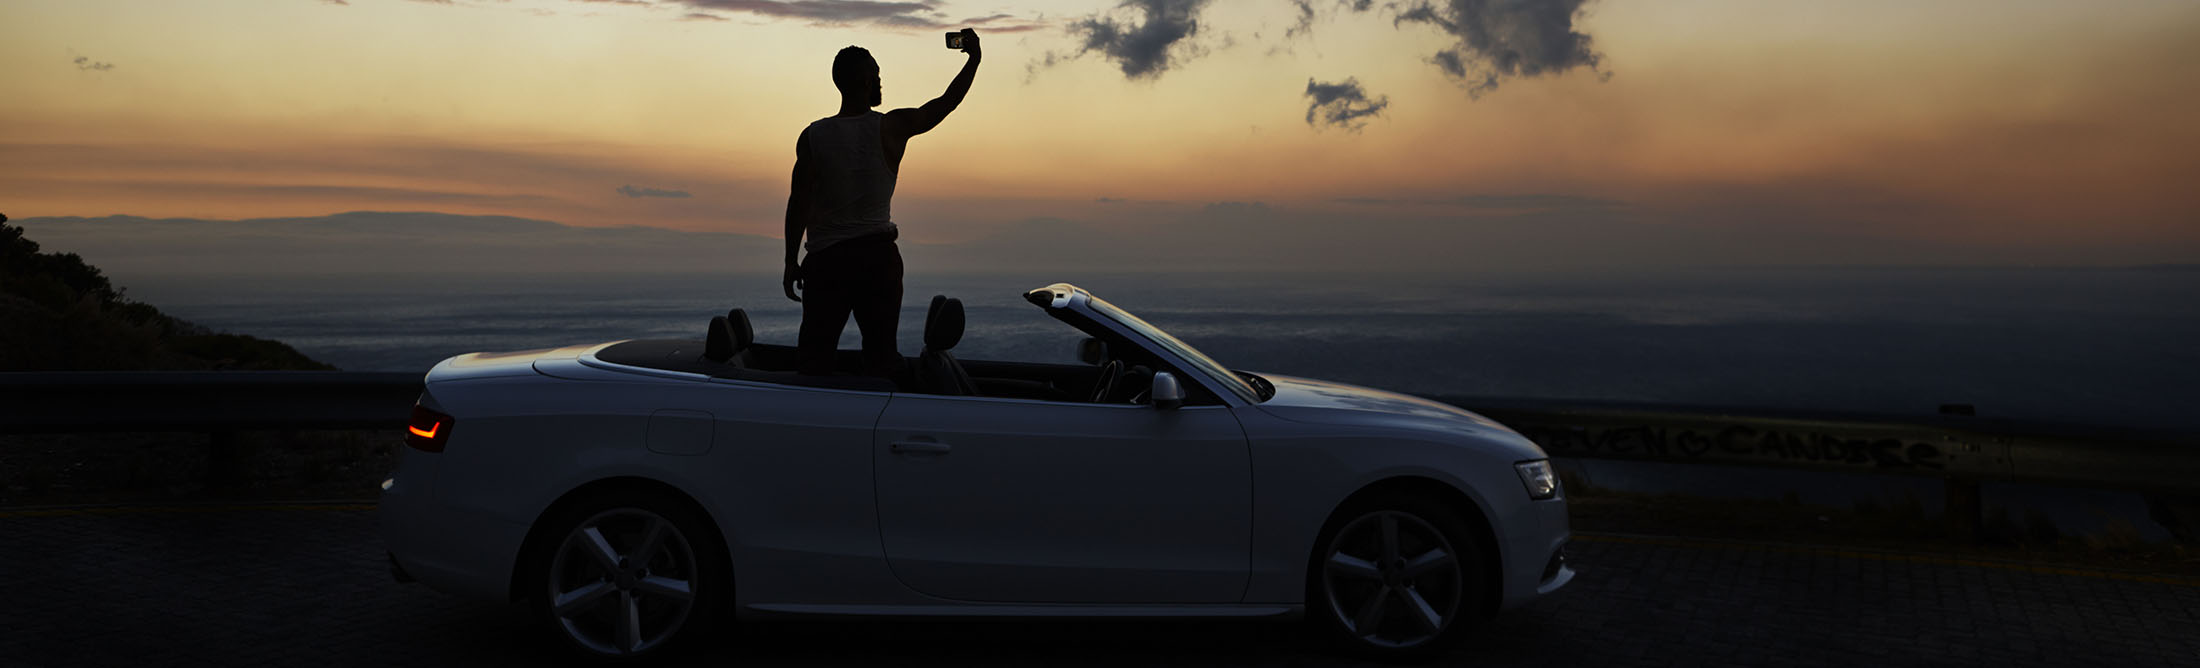 Man taking photo of sunset with smartphone, standing in convertible car